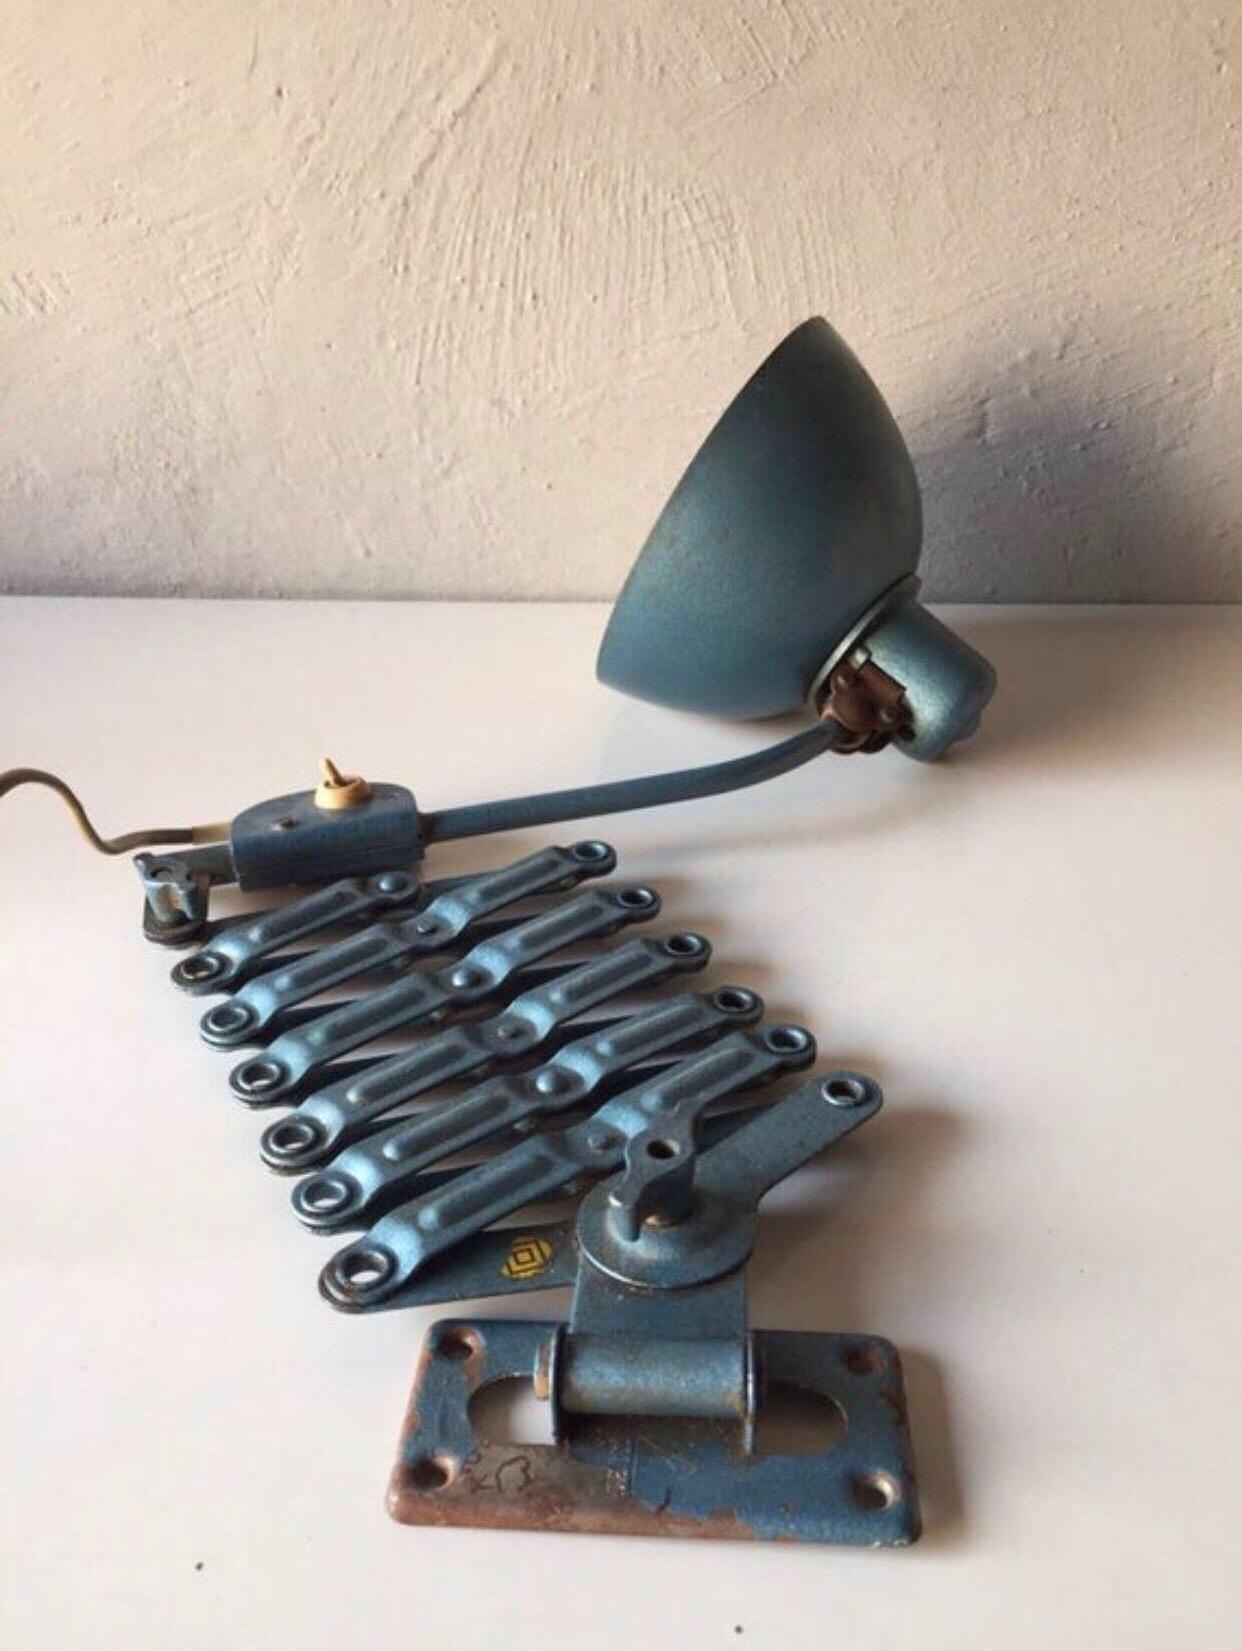 Brand: Reif Dresden, 1950s, East Germany
Betr-Nr. 1231/3507 

This Bauhaus artist studio wall and industrial lamp is made of a heavy blue metal body.
Works with E27 type of bulbs.
 